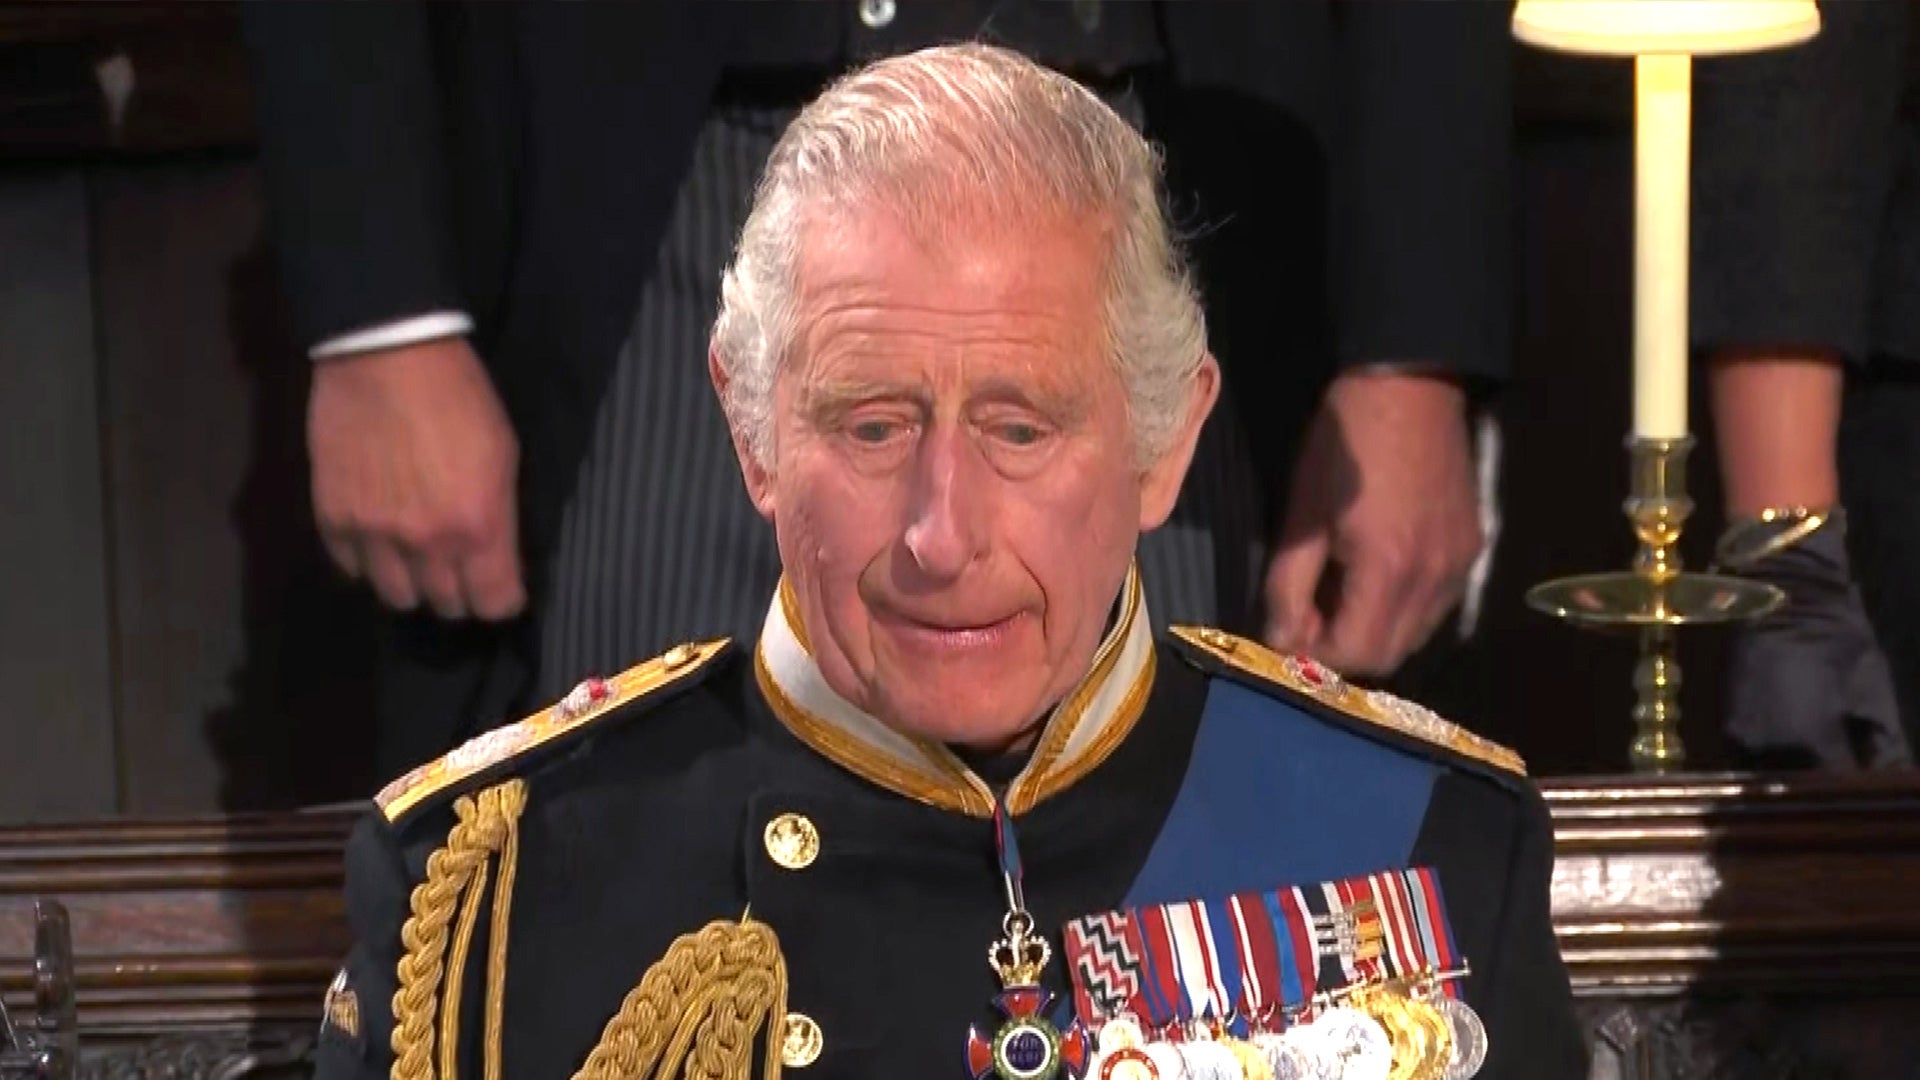 Queen Elizabeth's Funeral: King Charles Appears Emotional During 'God Save the King'